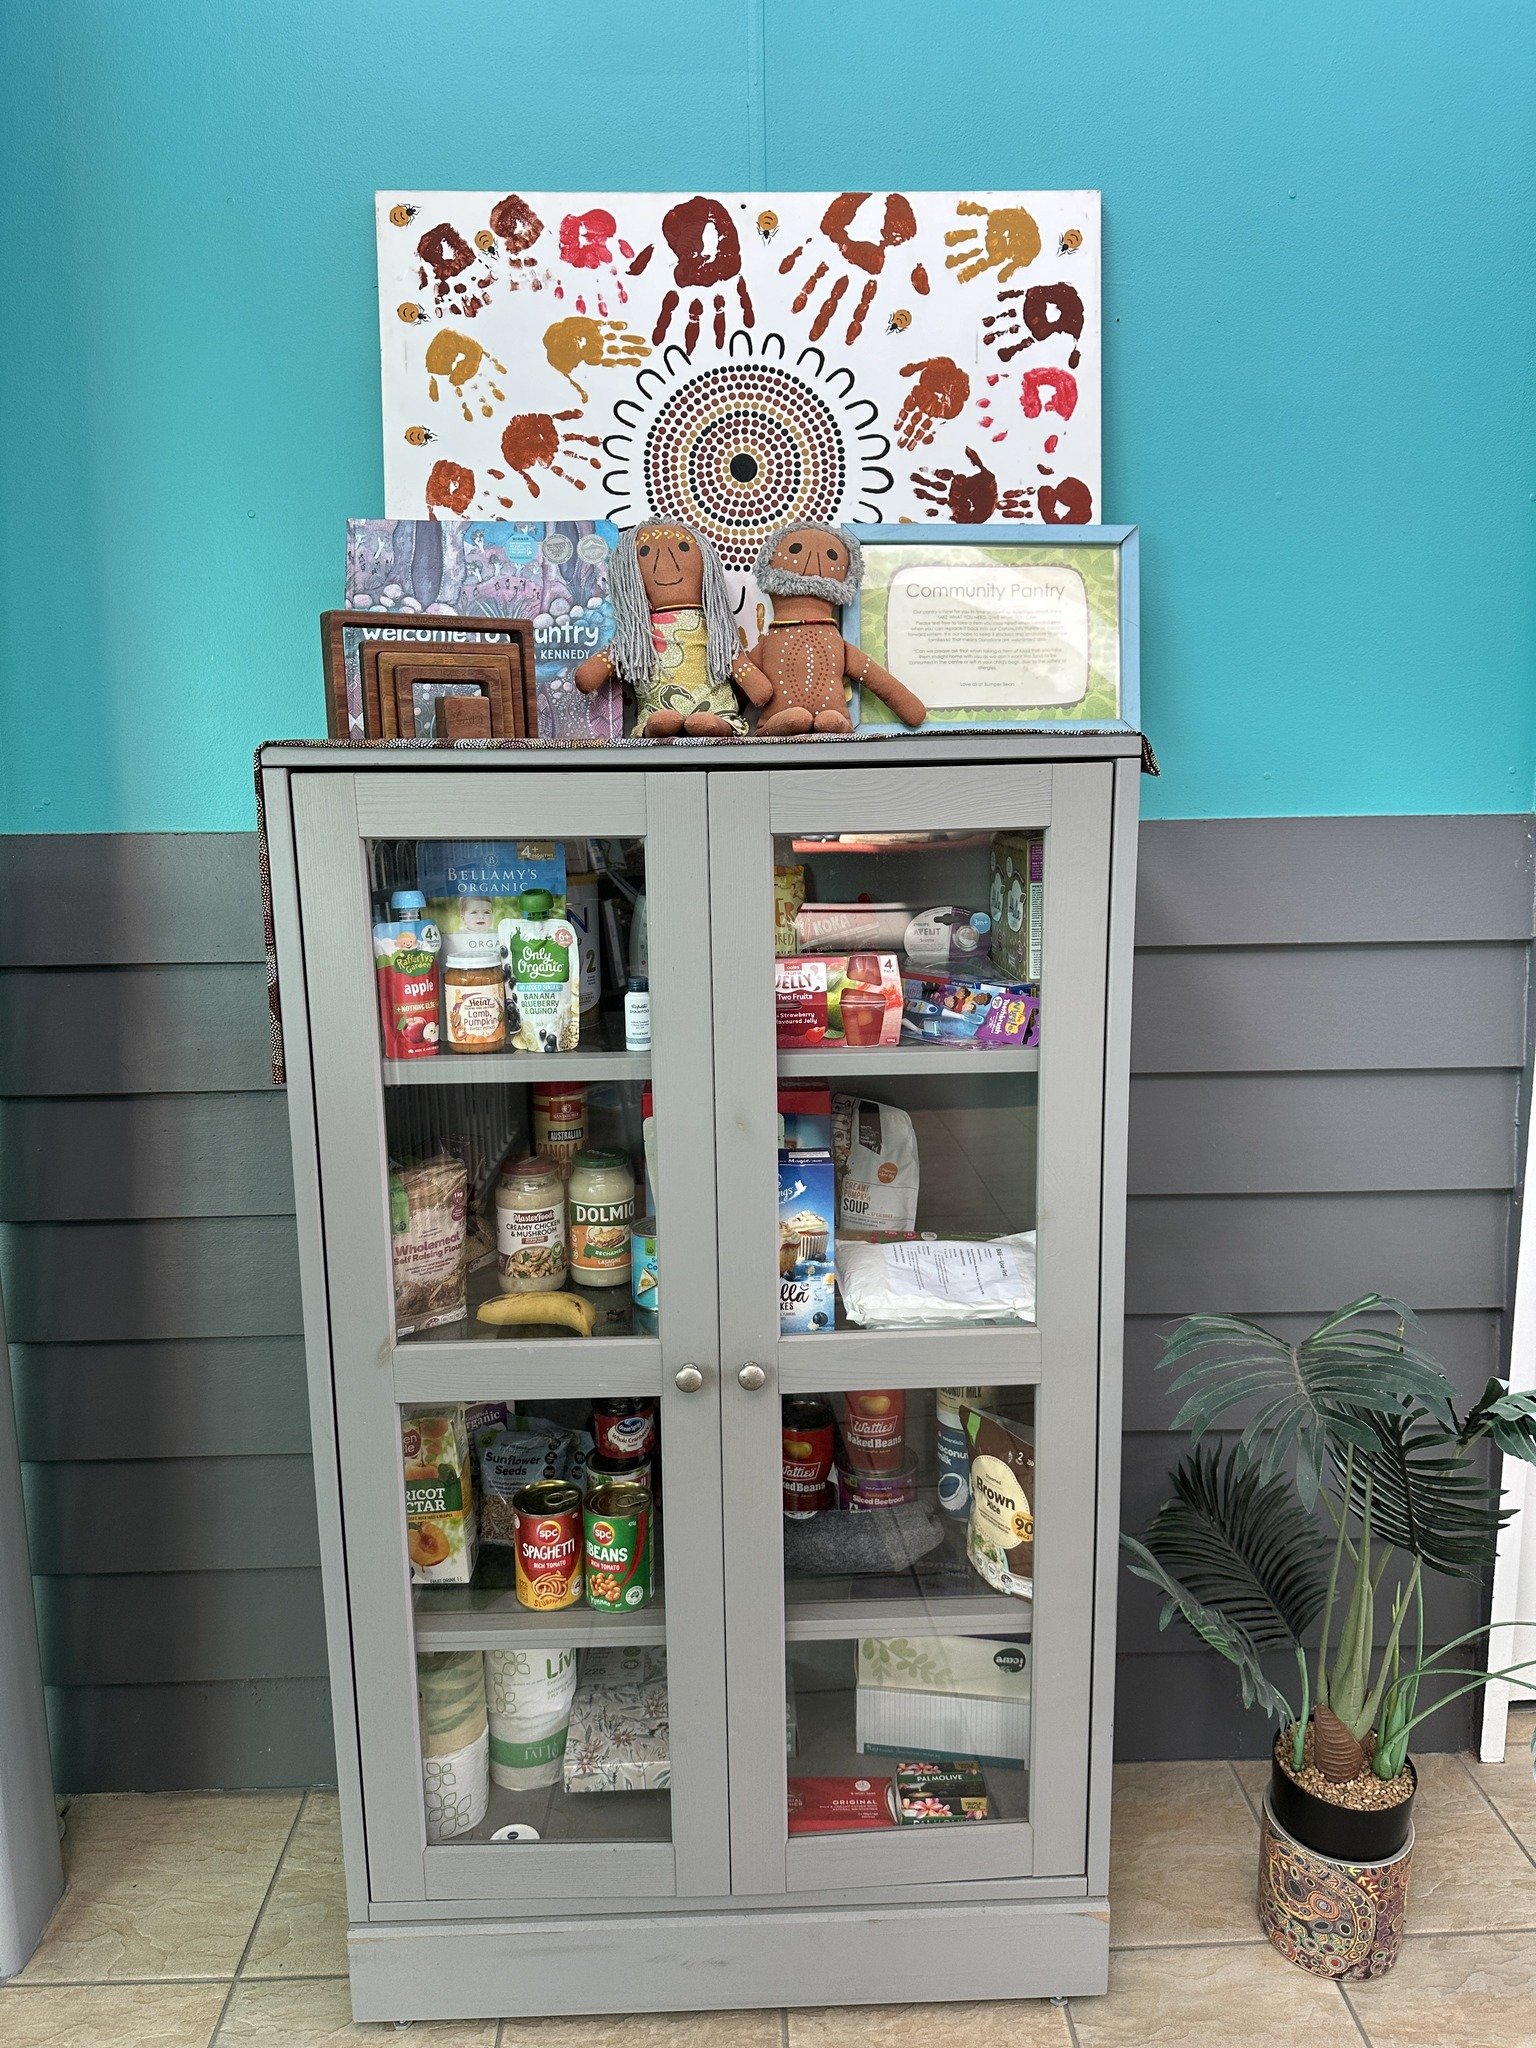 Have you seen our community pantry? It is in the foyer for families to donate items to, or take items from. Forgot to go the the shops? Need one extra item to complete your meal? Please feel welcome to share the love and donate if you can, or take wh